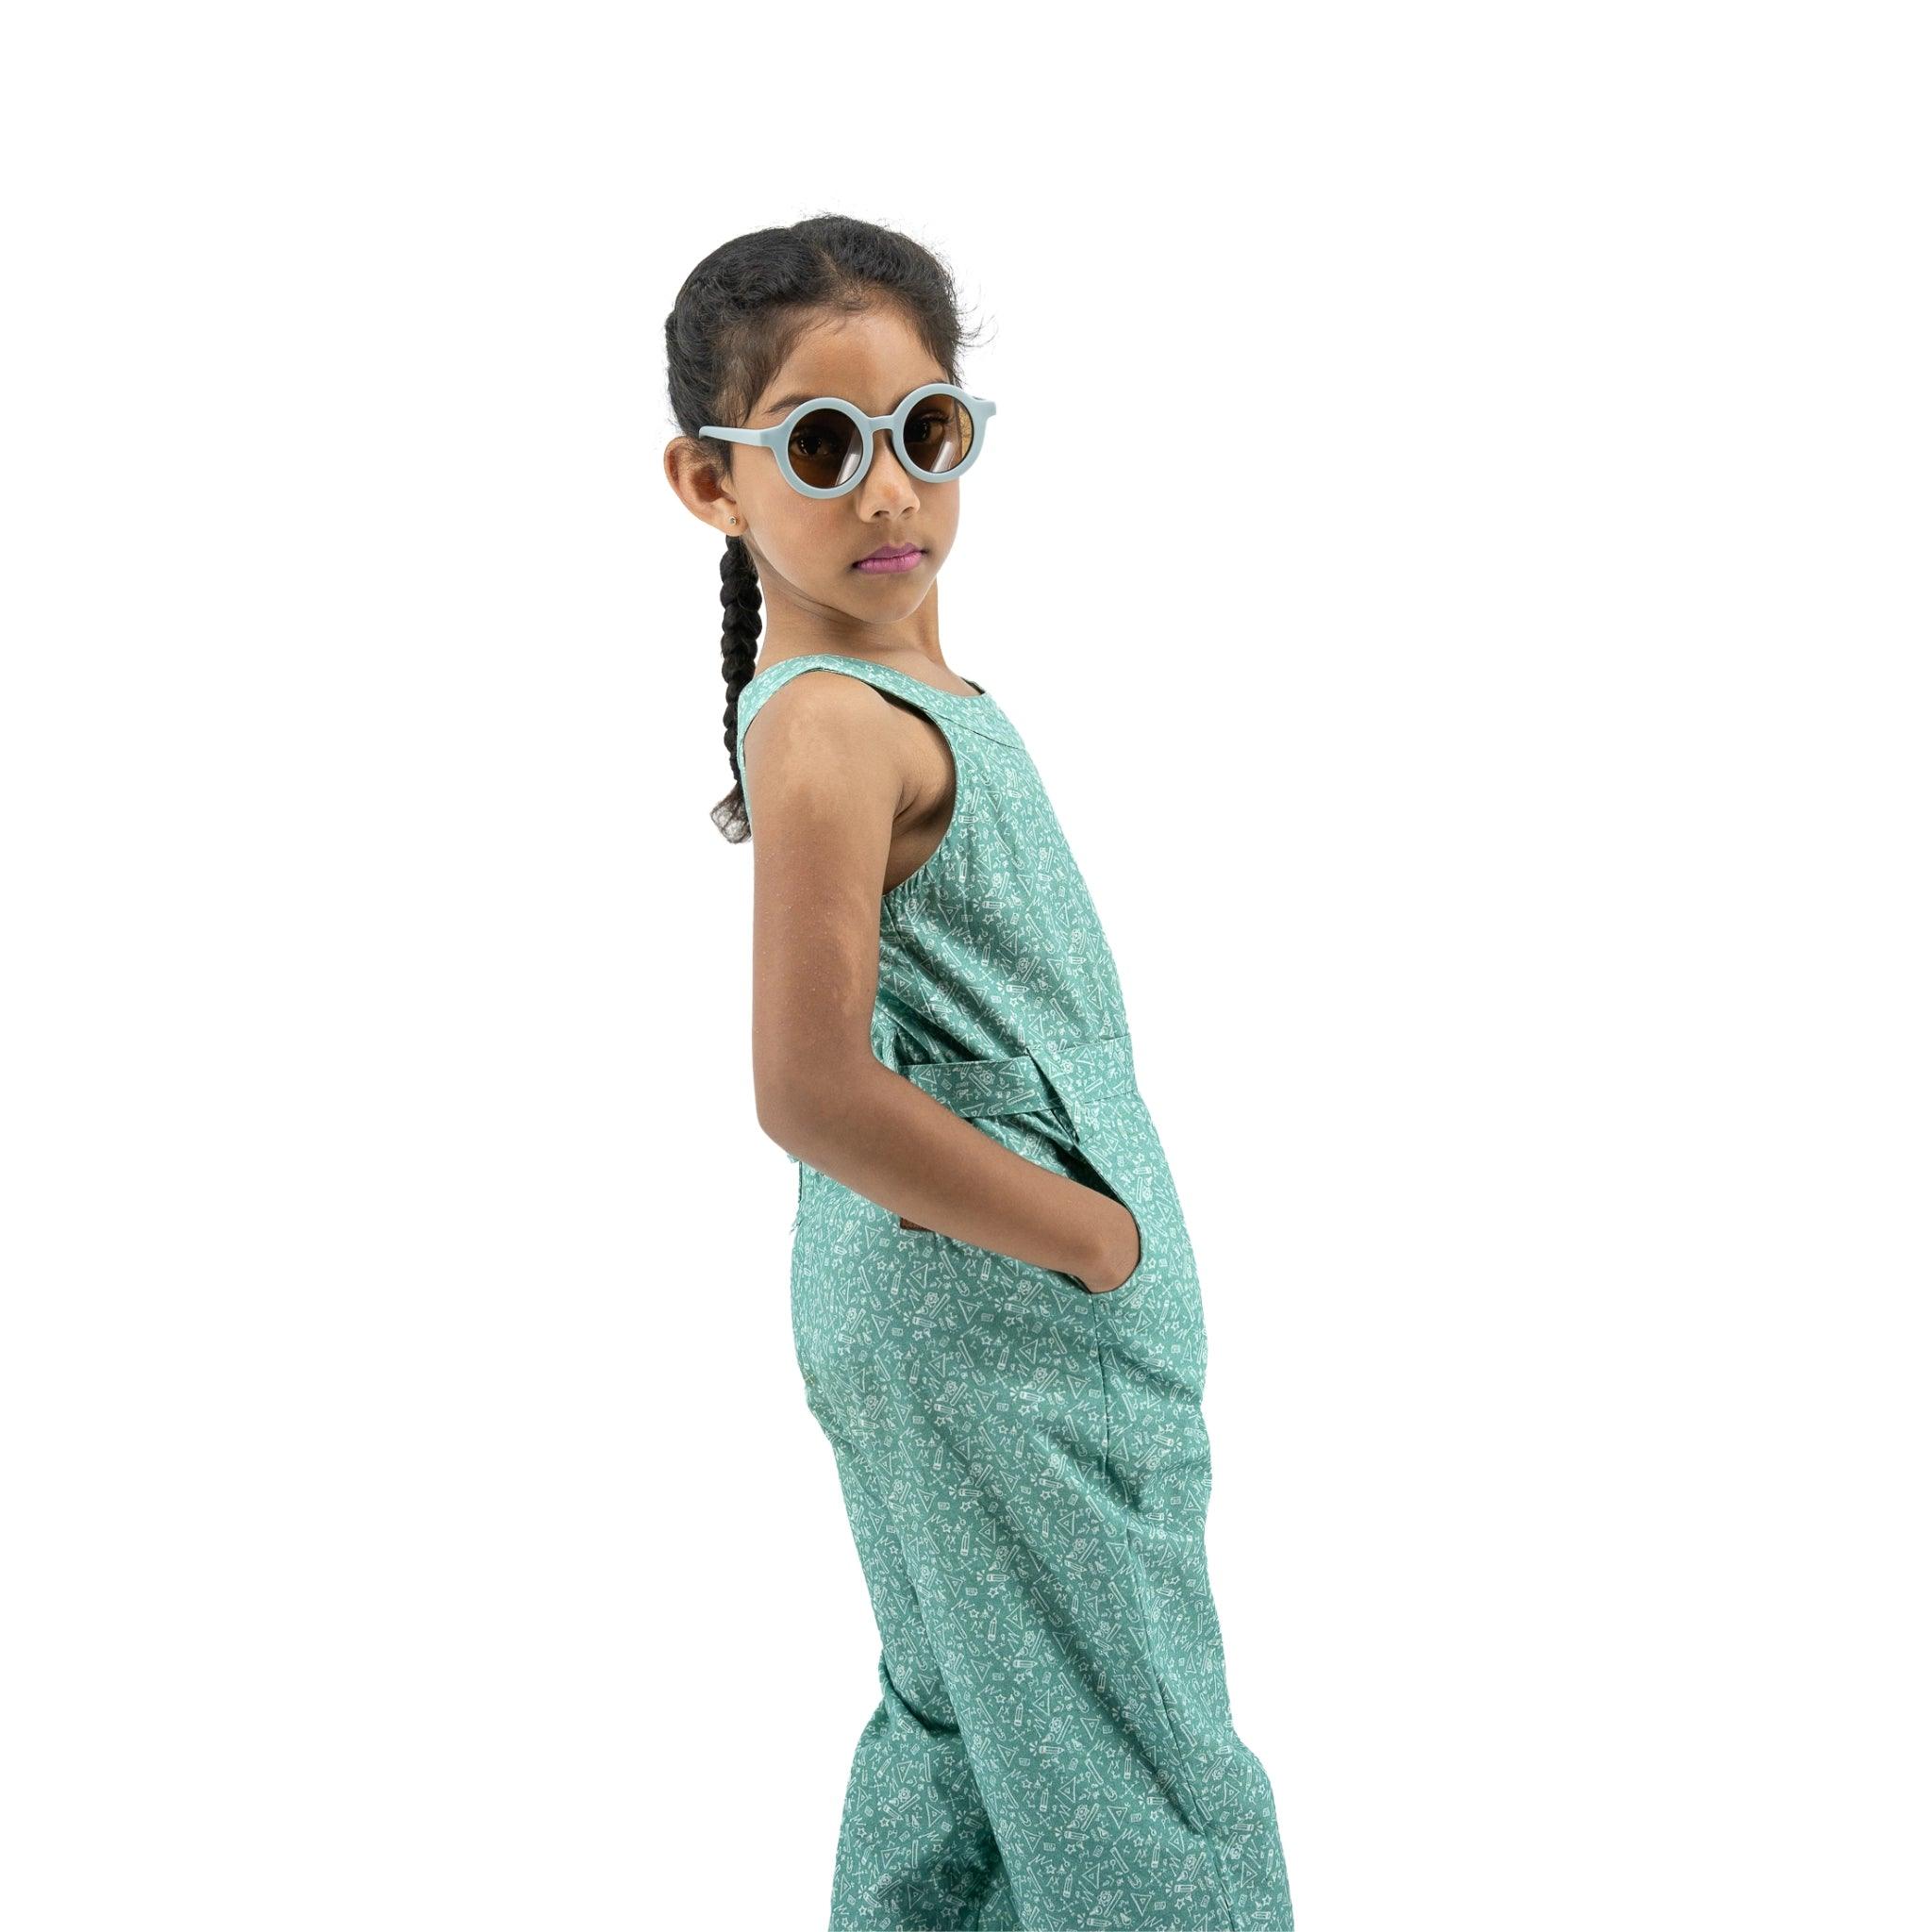 Young girl wearing eco-friendly sunglasses and a Karee Smoke Green Cotton Jumpsuit For Girls, standing sideways with hands on hips, isolated on a white background.